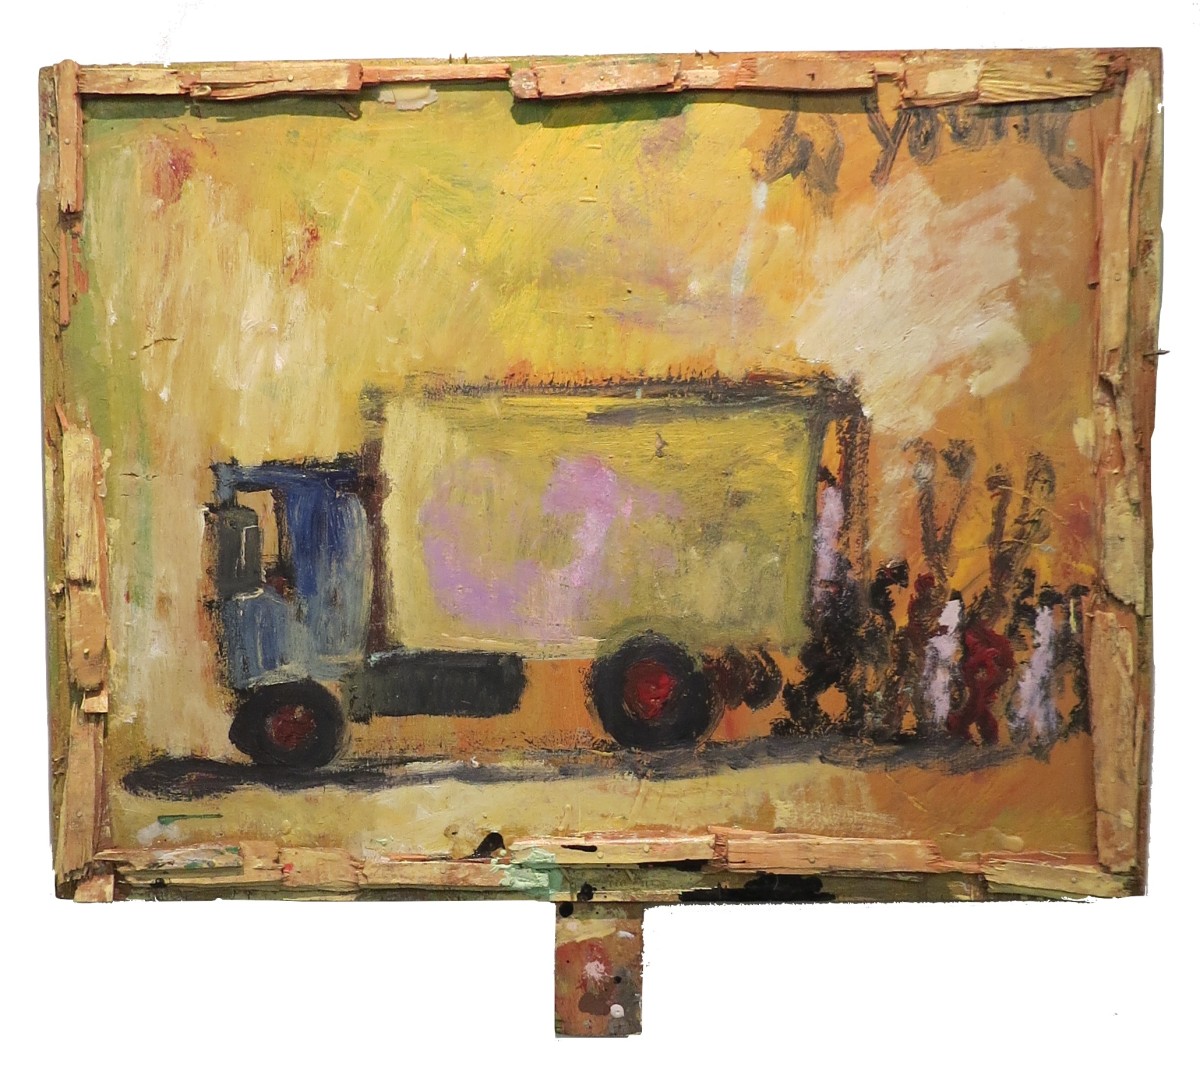 Untitled (Truck & Protesters) by Purvis Young 